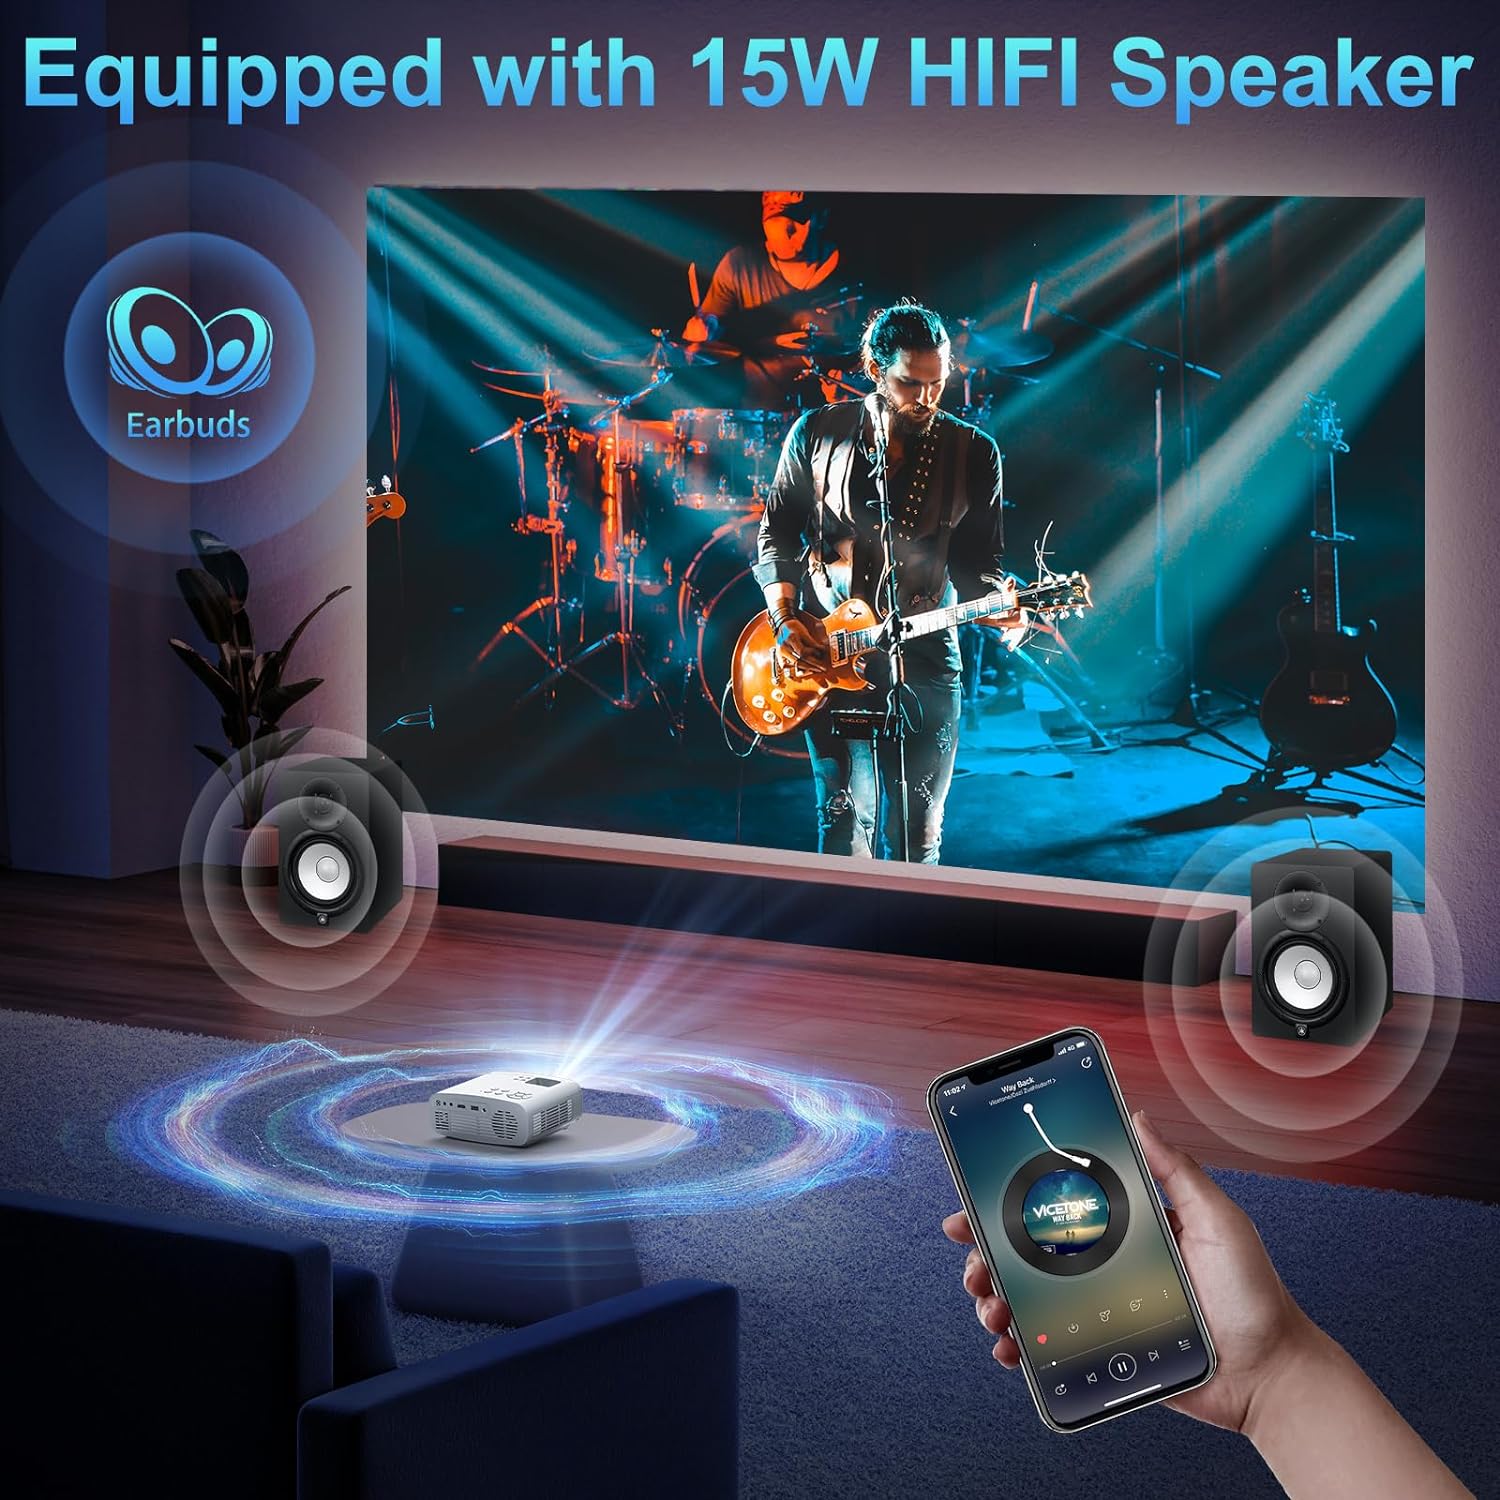 Great Choice Products 5G Wifi Projector Bluetooth,10000L Native 1080P Outdoor Portable Video Projector 4K Supported,Home Theater Movie Projector…